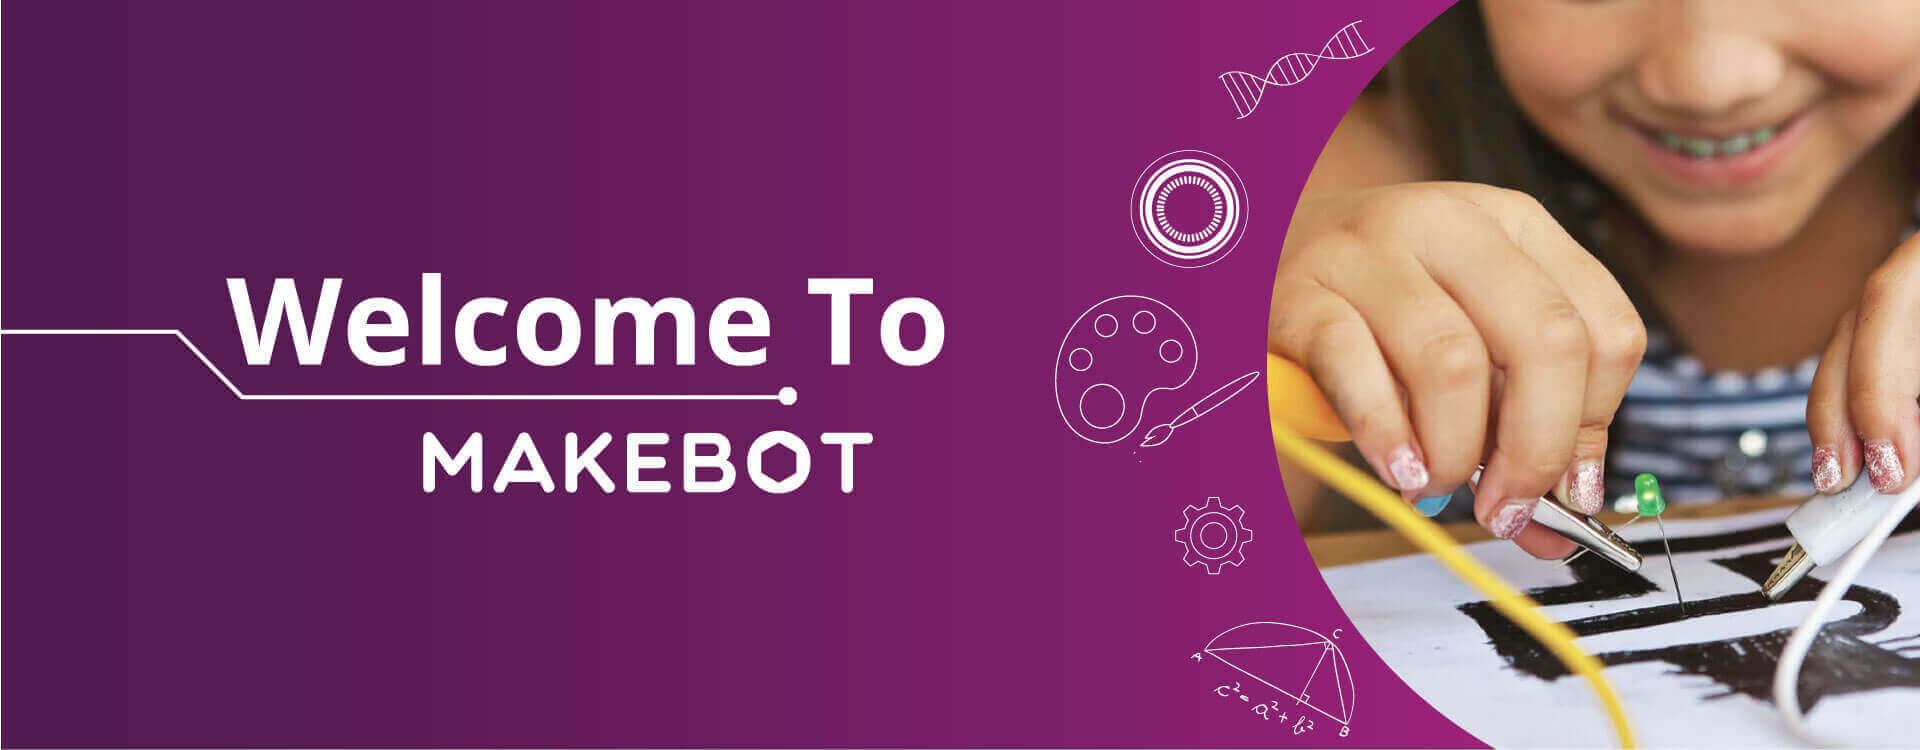 Welcome To Makebot